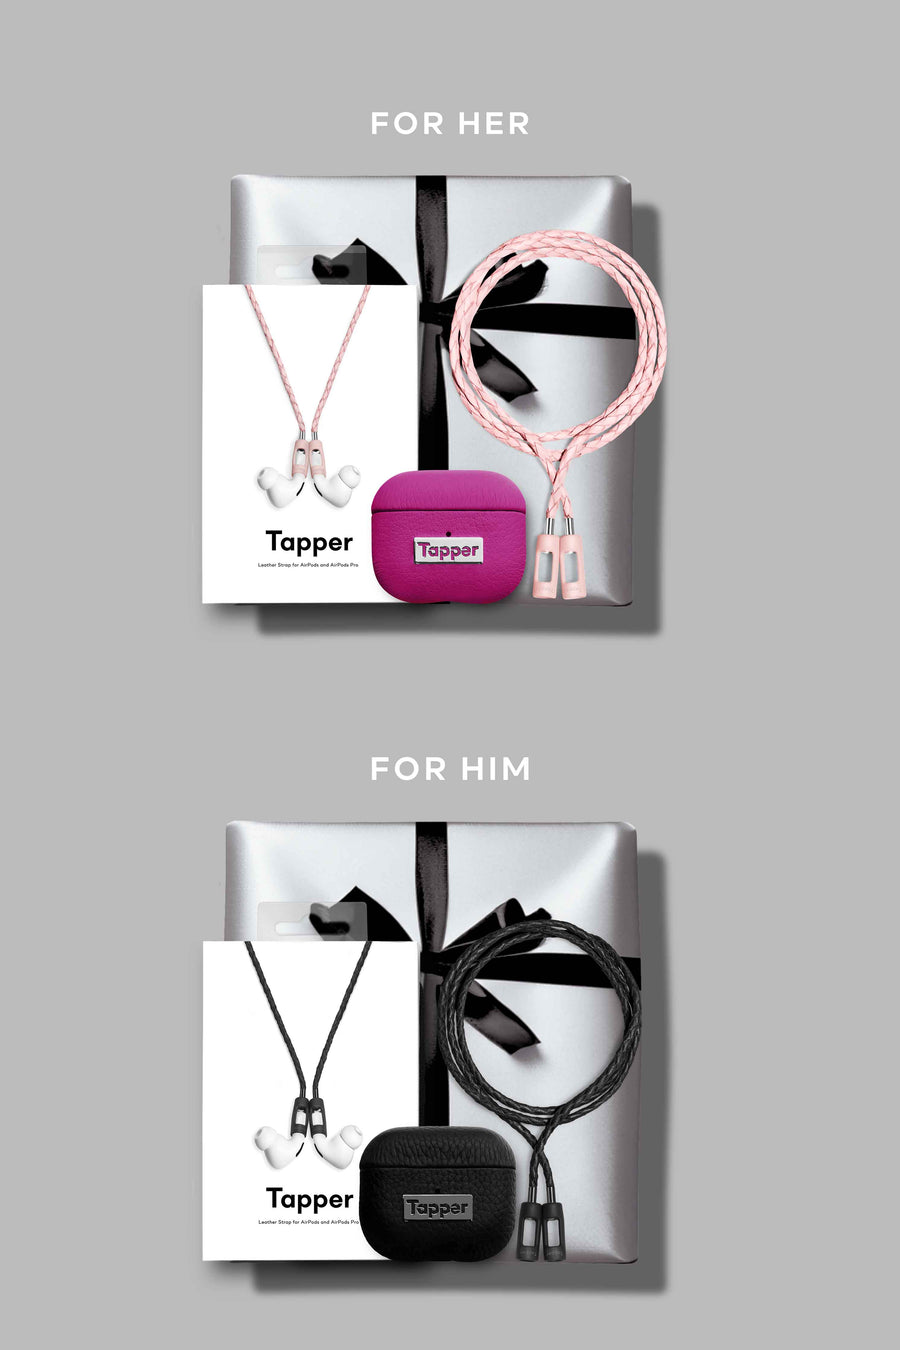 Grab the perfect gift for your loved ones at gettapper.com! The Tapper AirPods Chain is the ideal gift for all AirPods users, especially the ones that tend to misplace or lose their AirPods over and over again. Tapper - The Original Tech Jewelry for AirPods and iPhone